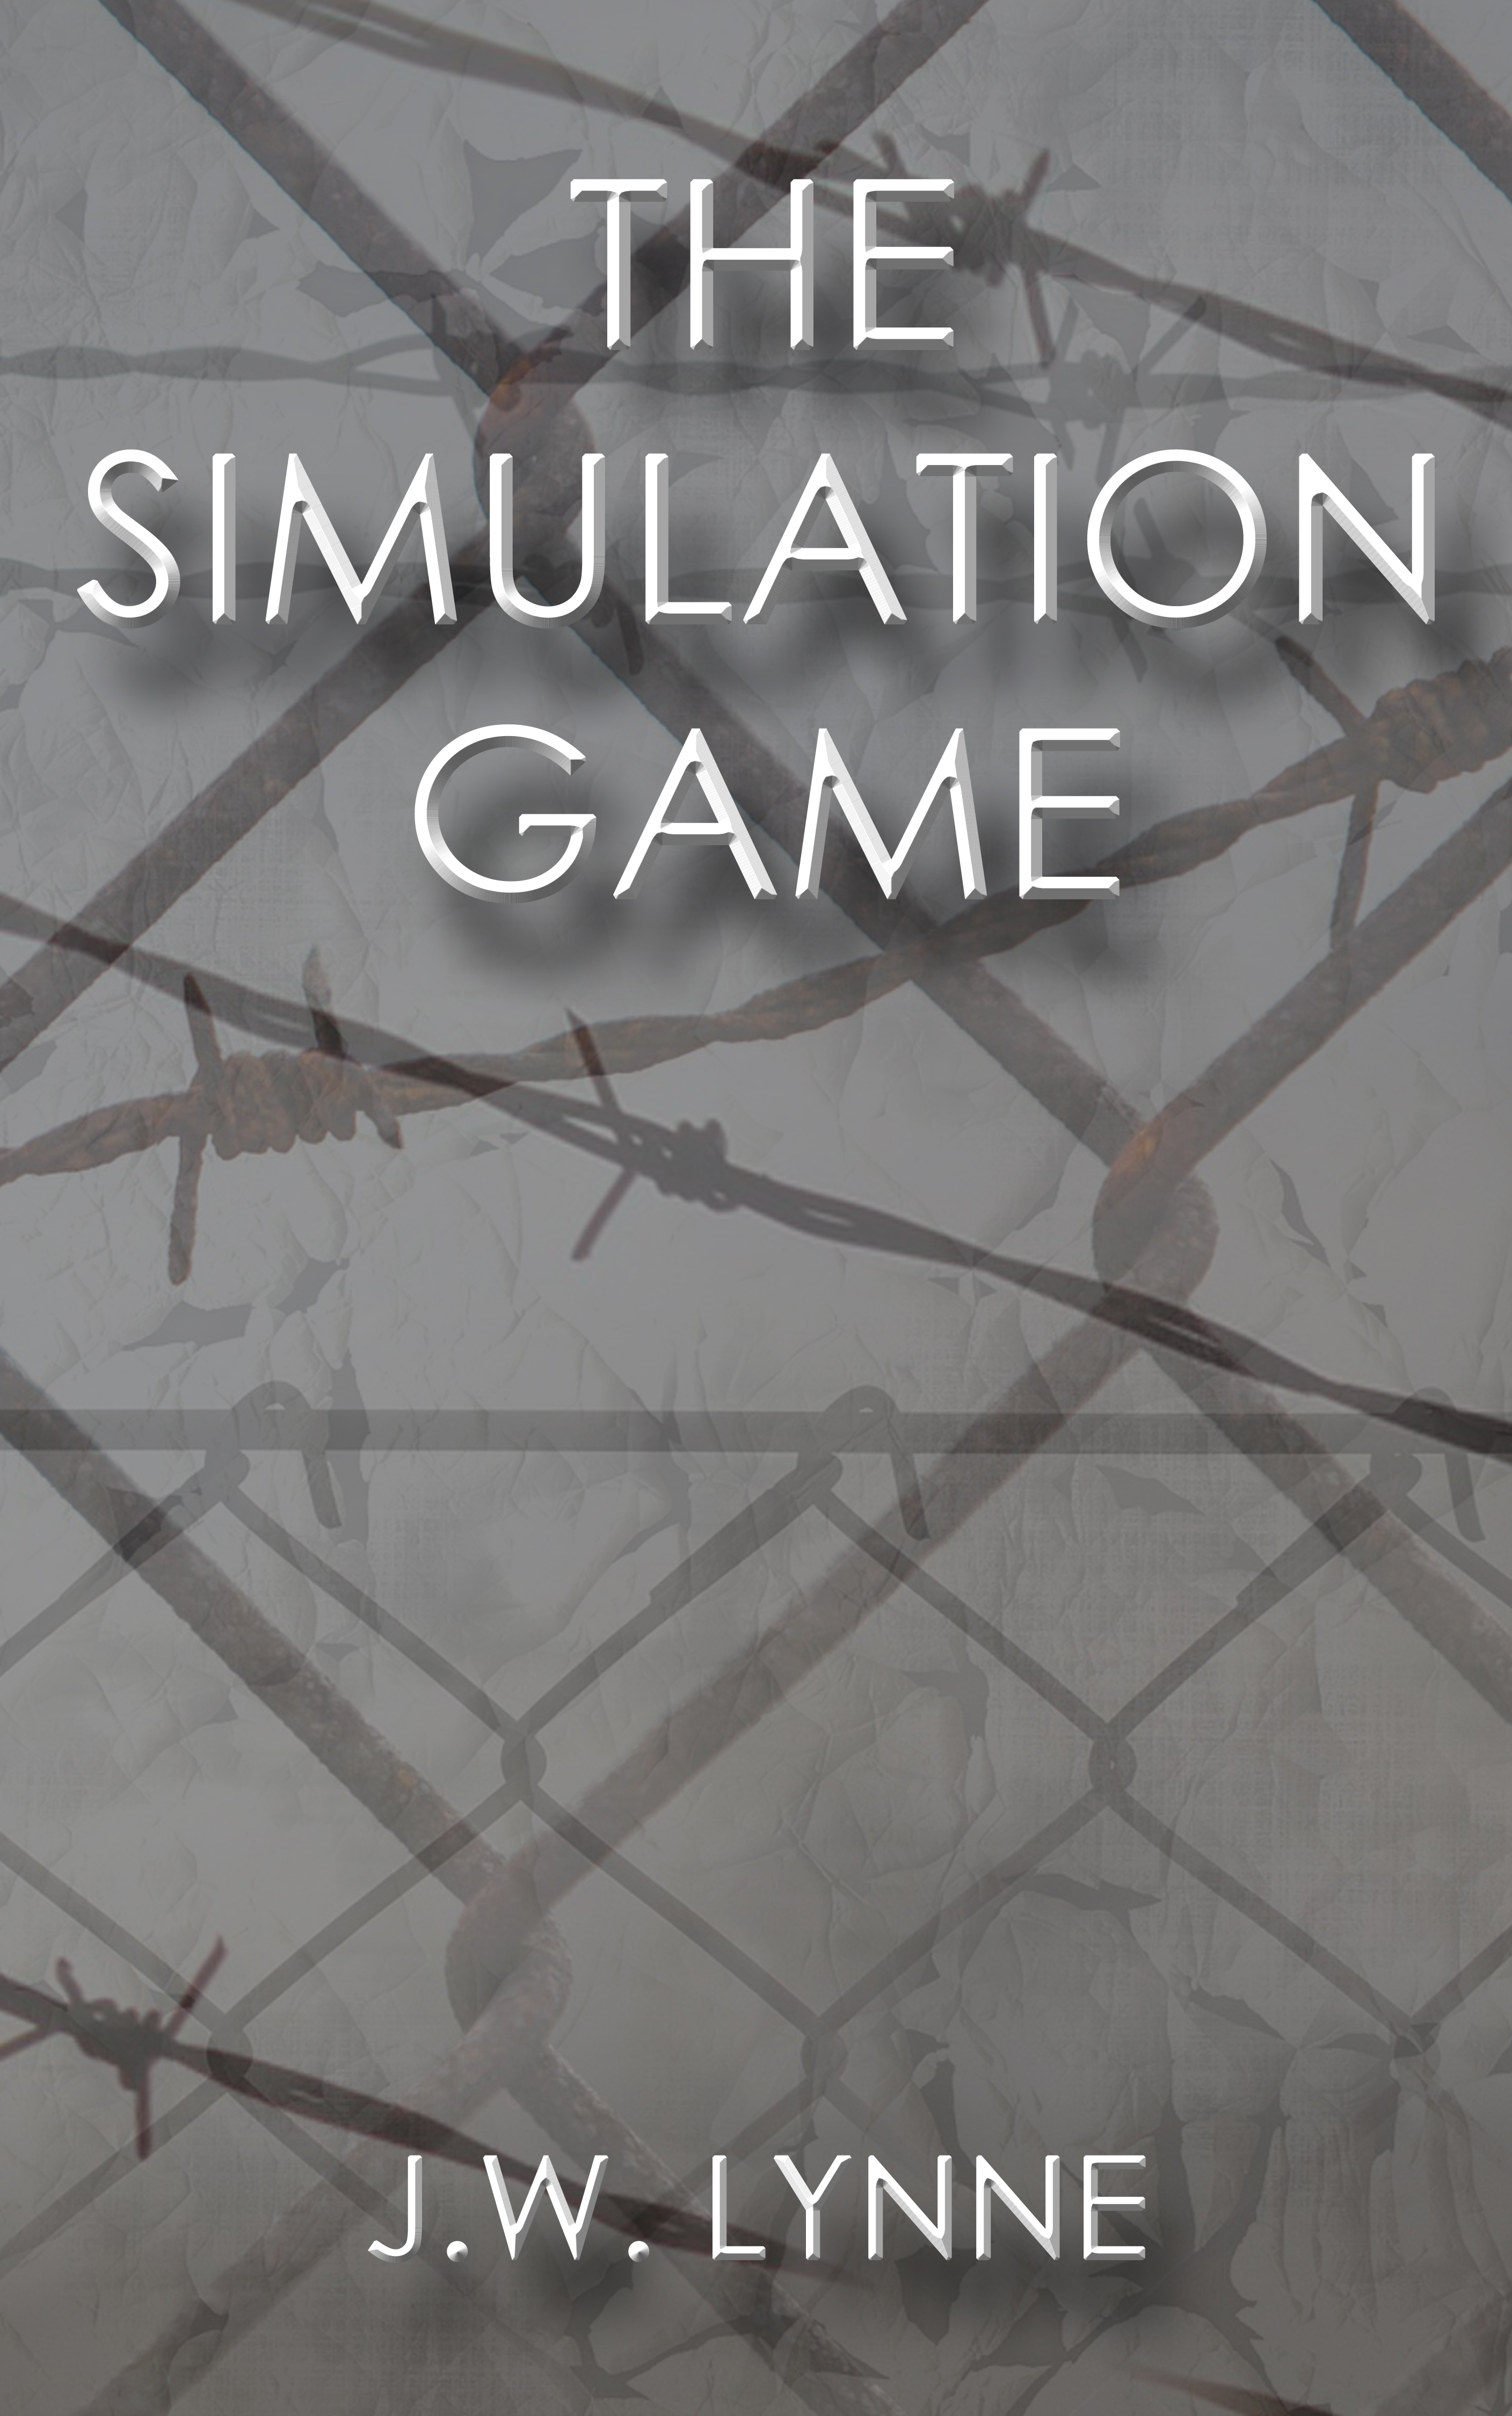 The Simulation Game book cover